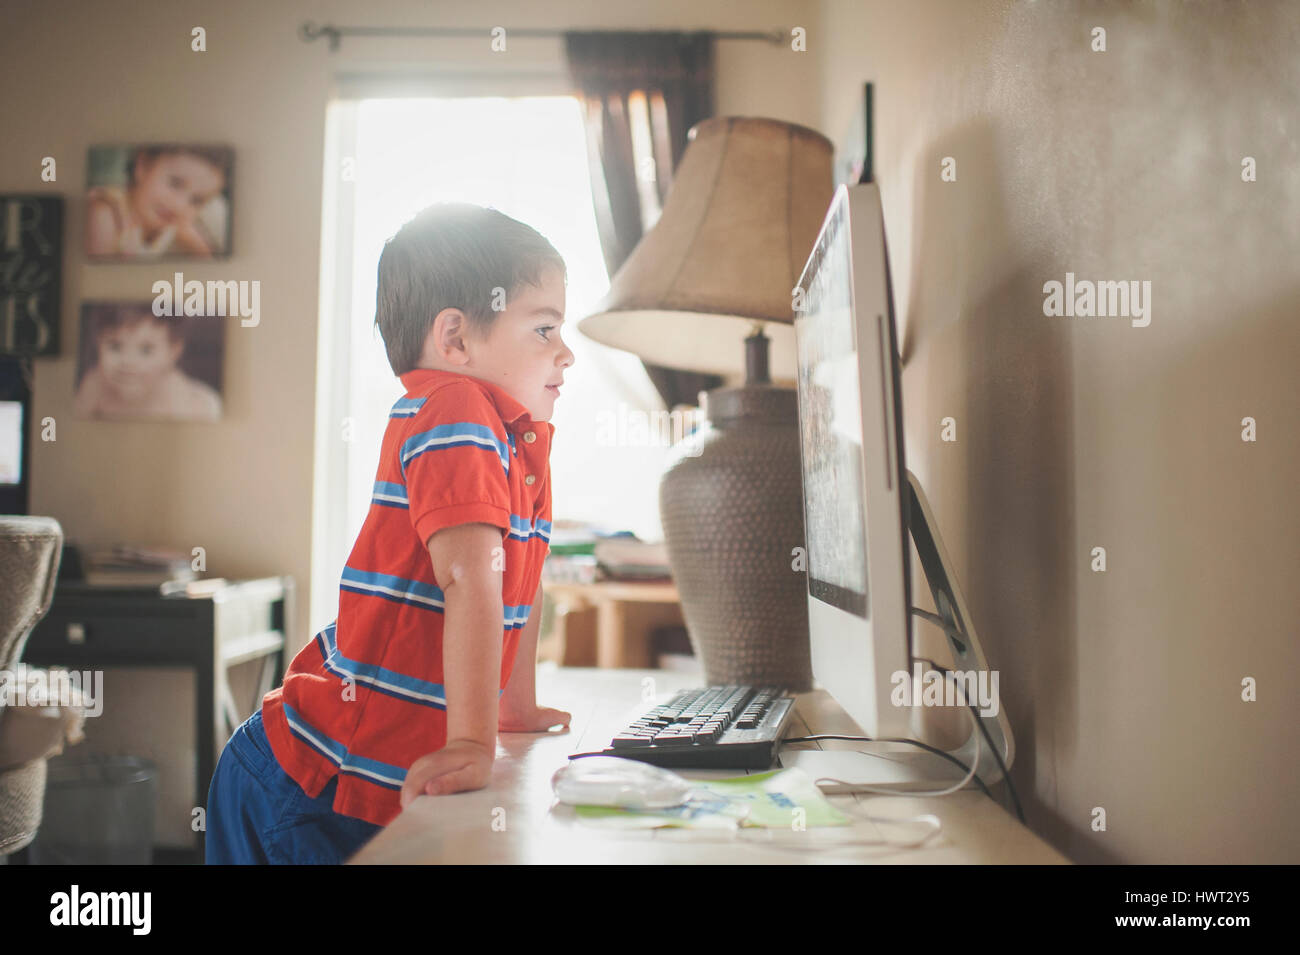 Boy looking at desktop computer while standing by table at home Stock Photo